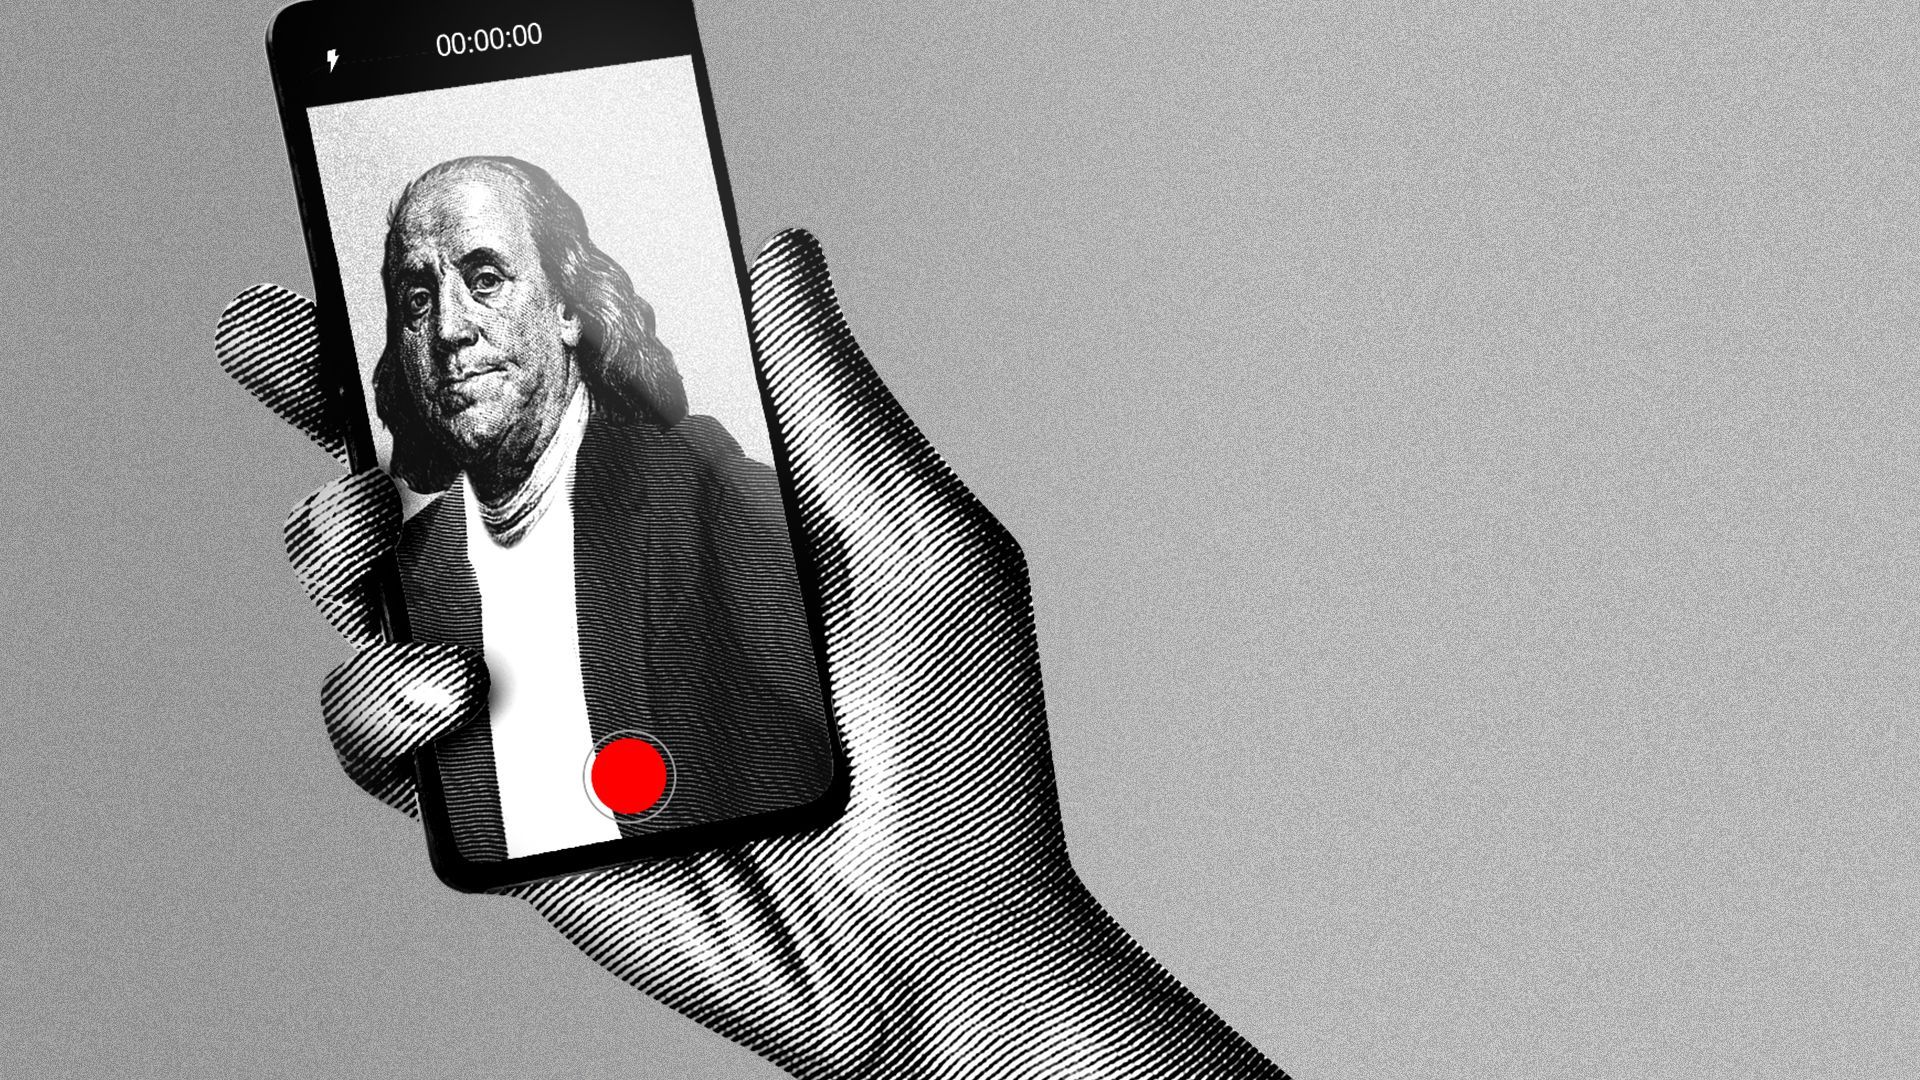 an illustration of ben franklin taking a selfie on an iphone 